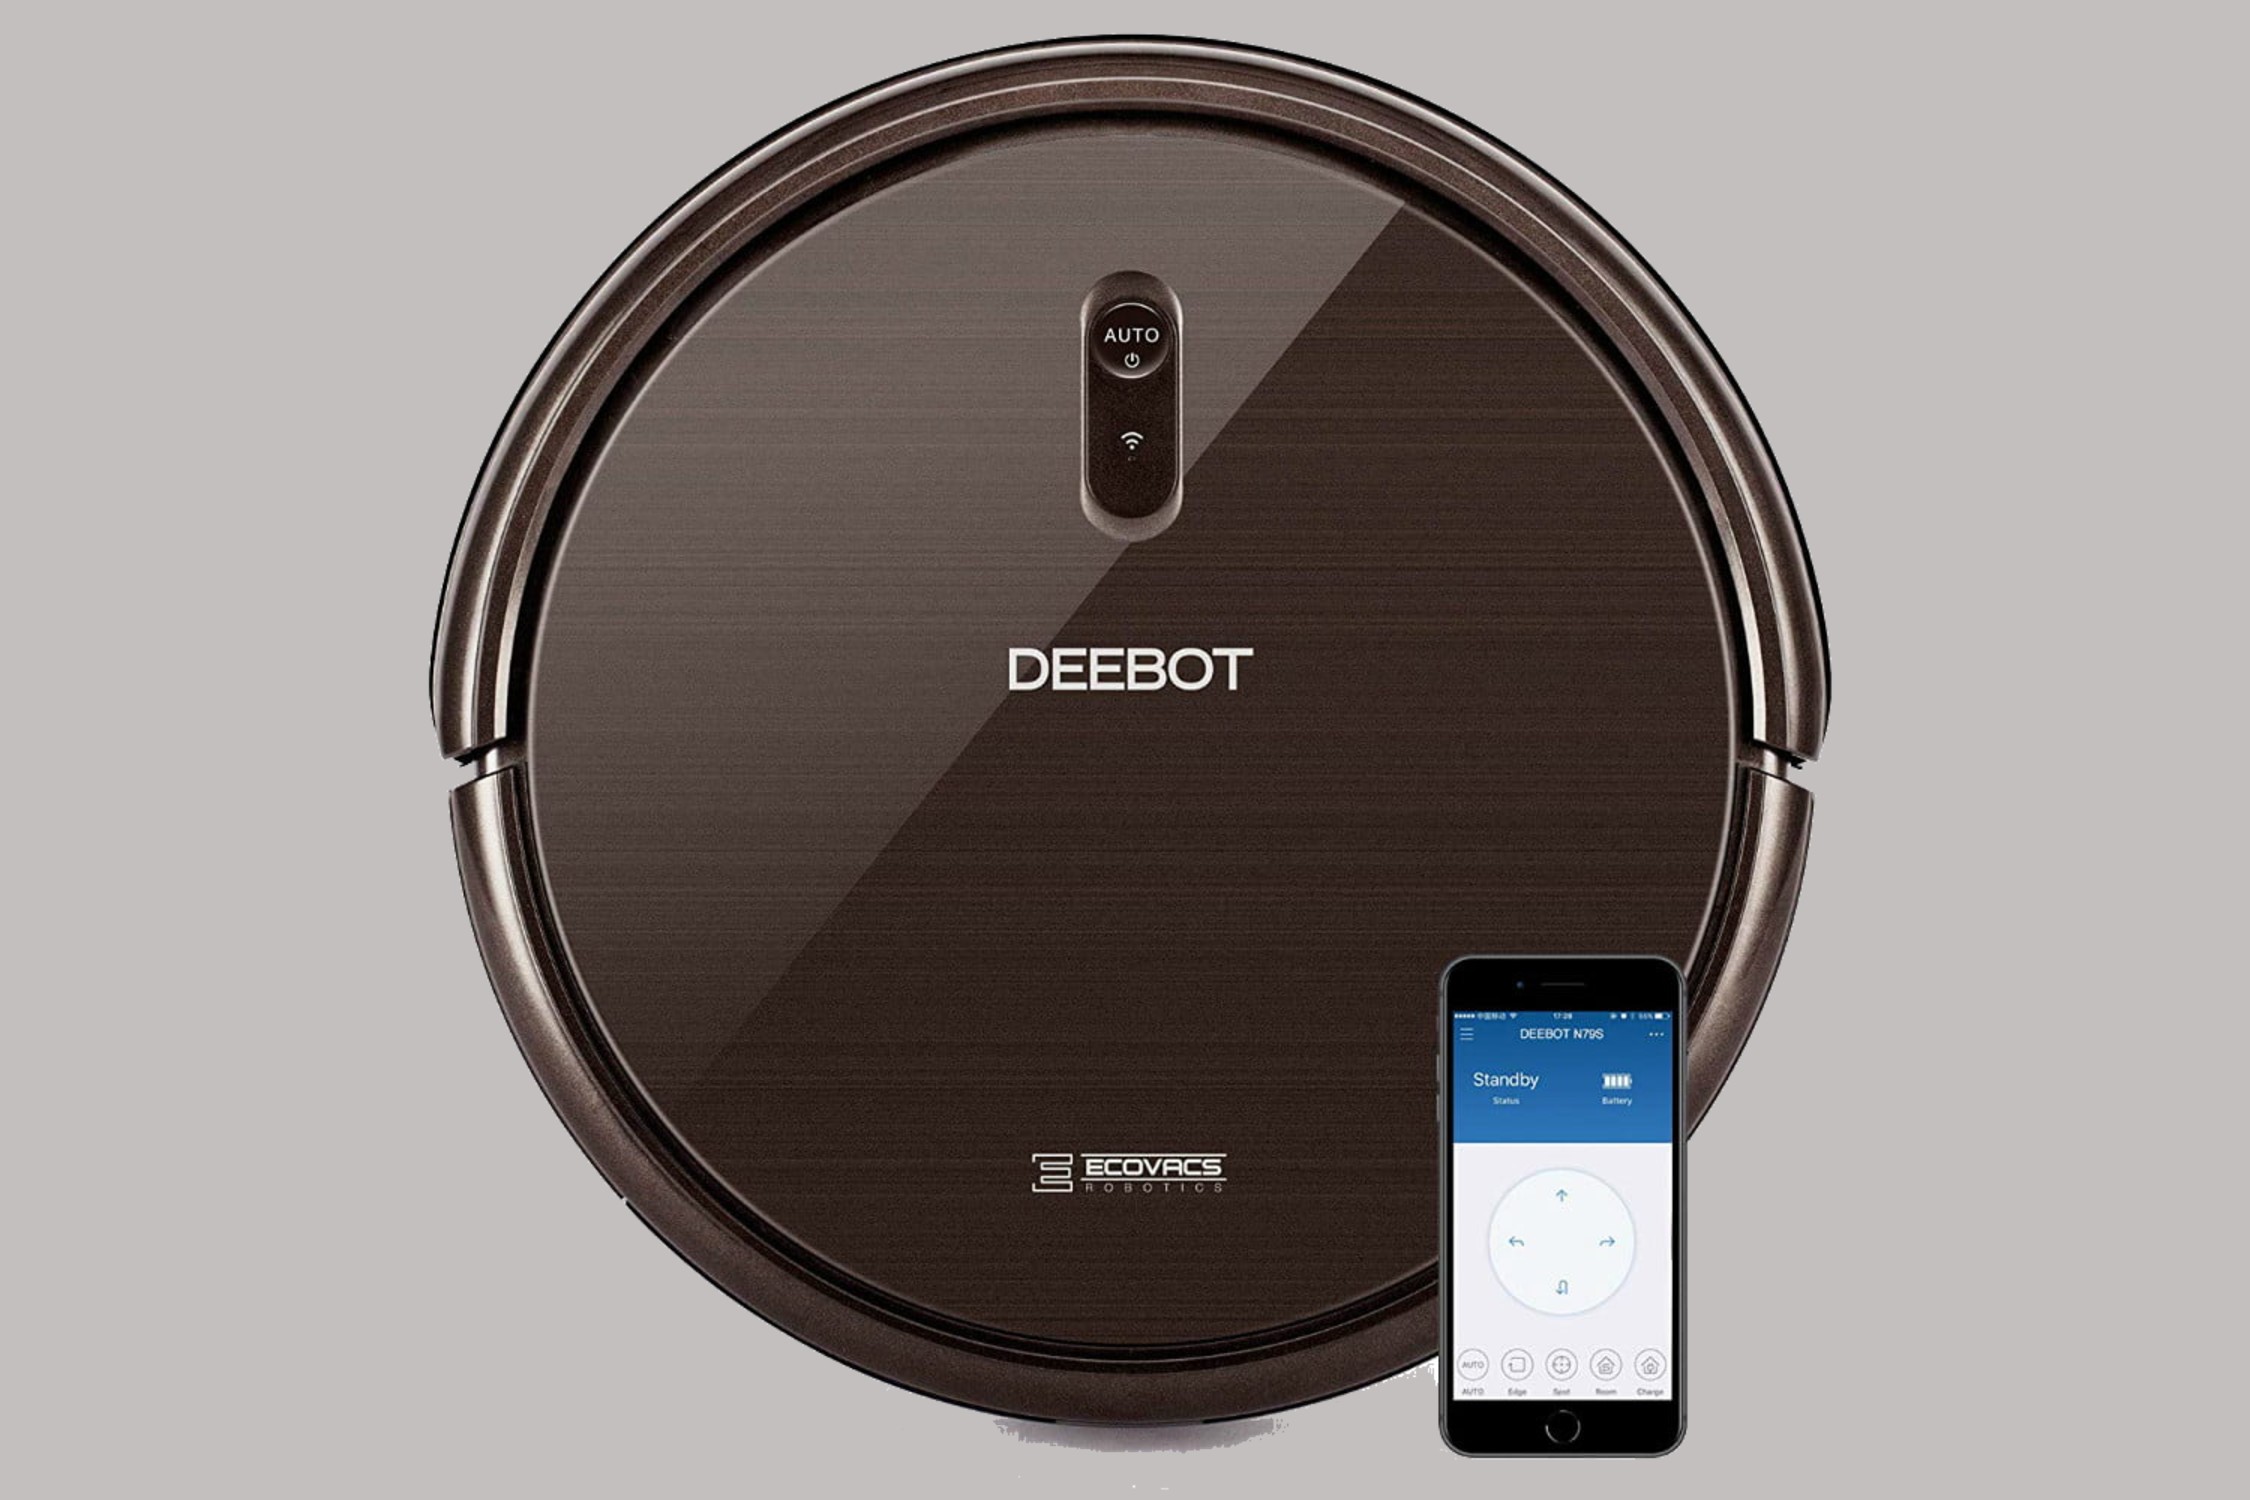 robot vacuum cleaners change lives with drama and supense ecovacs deebot n79s